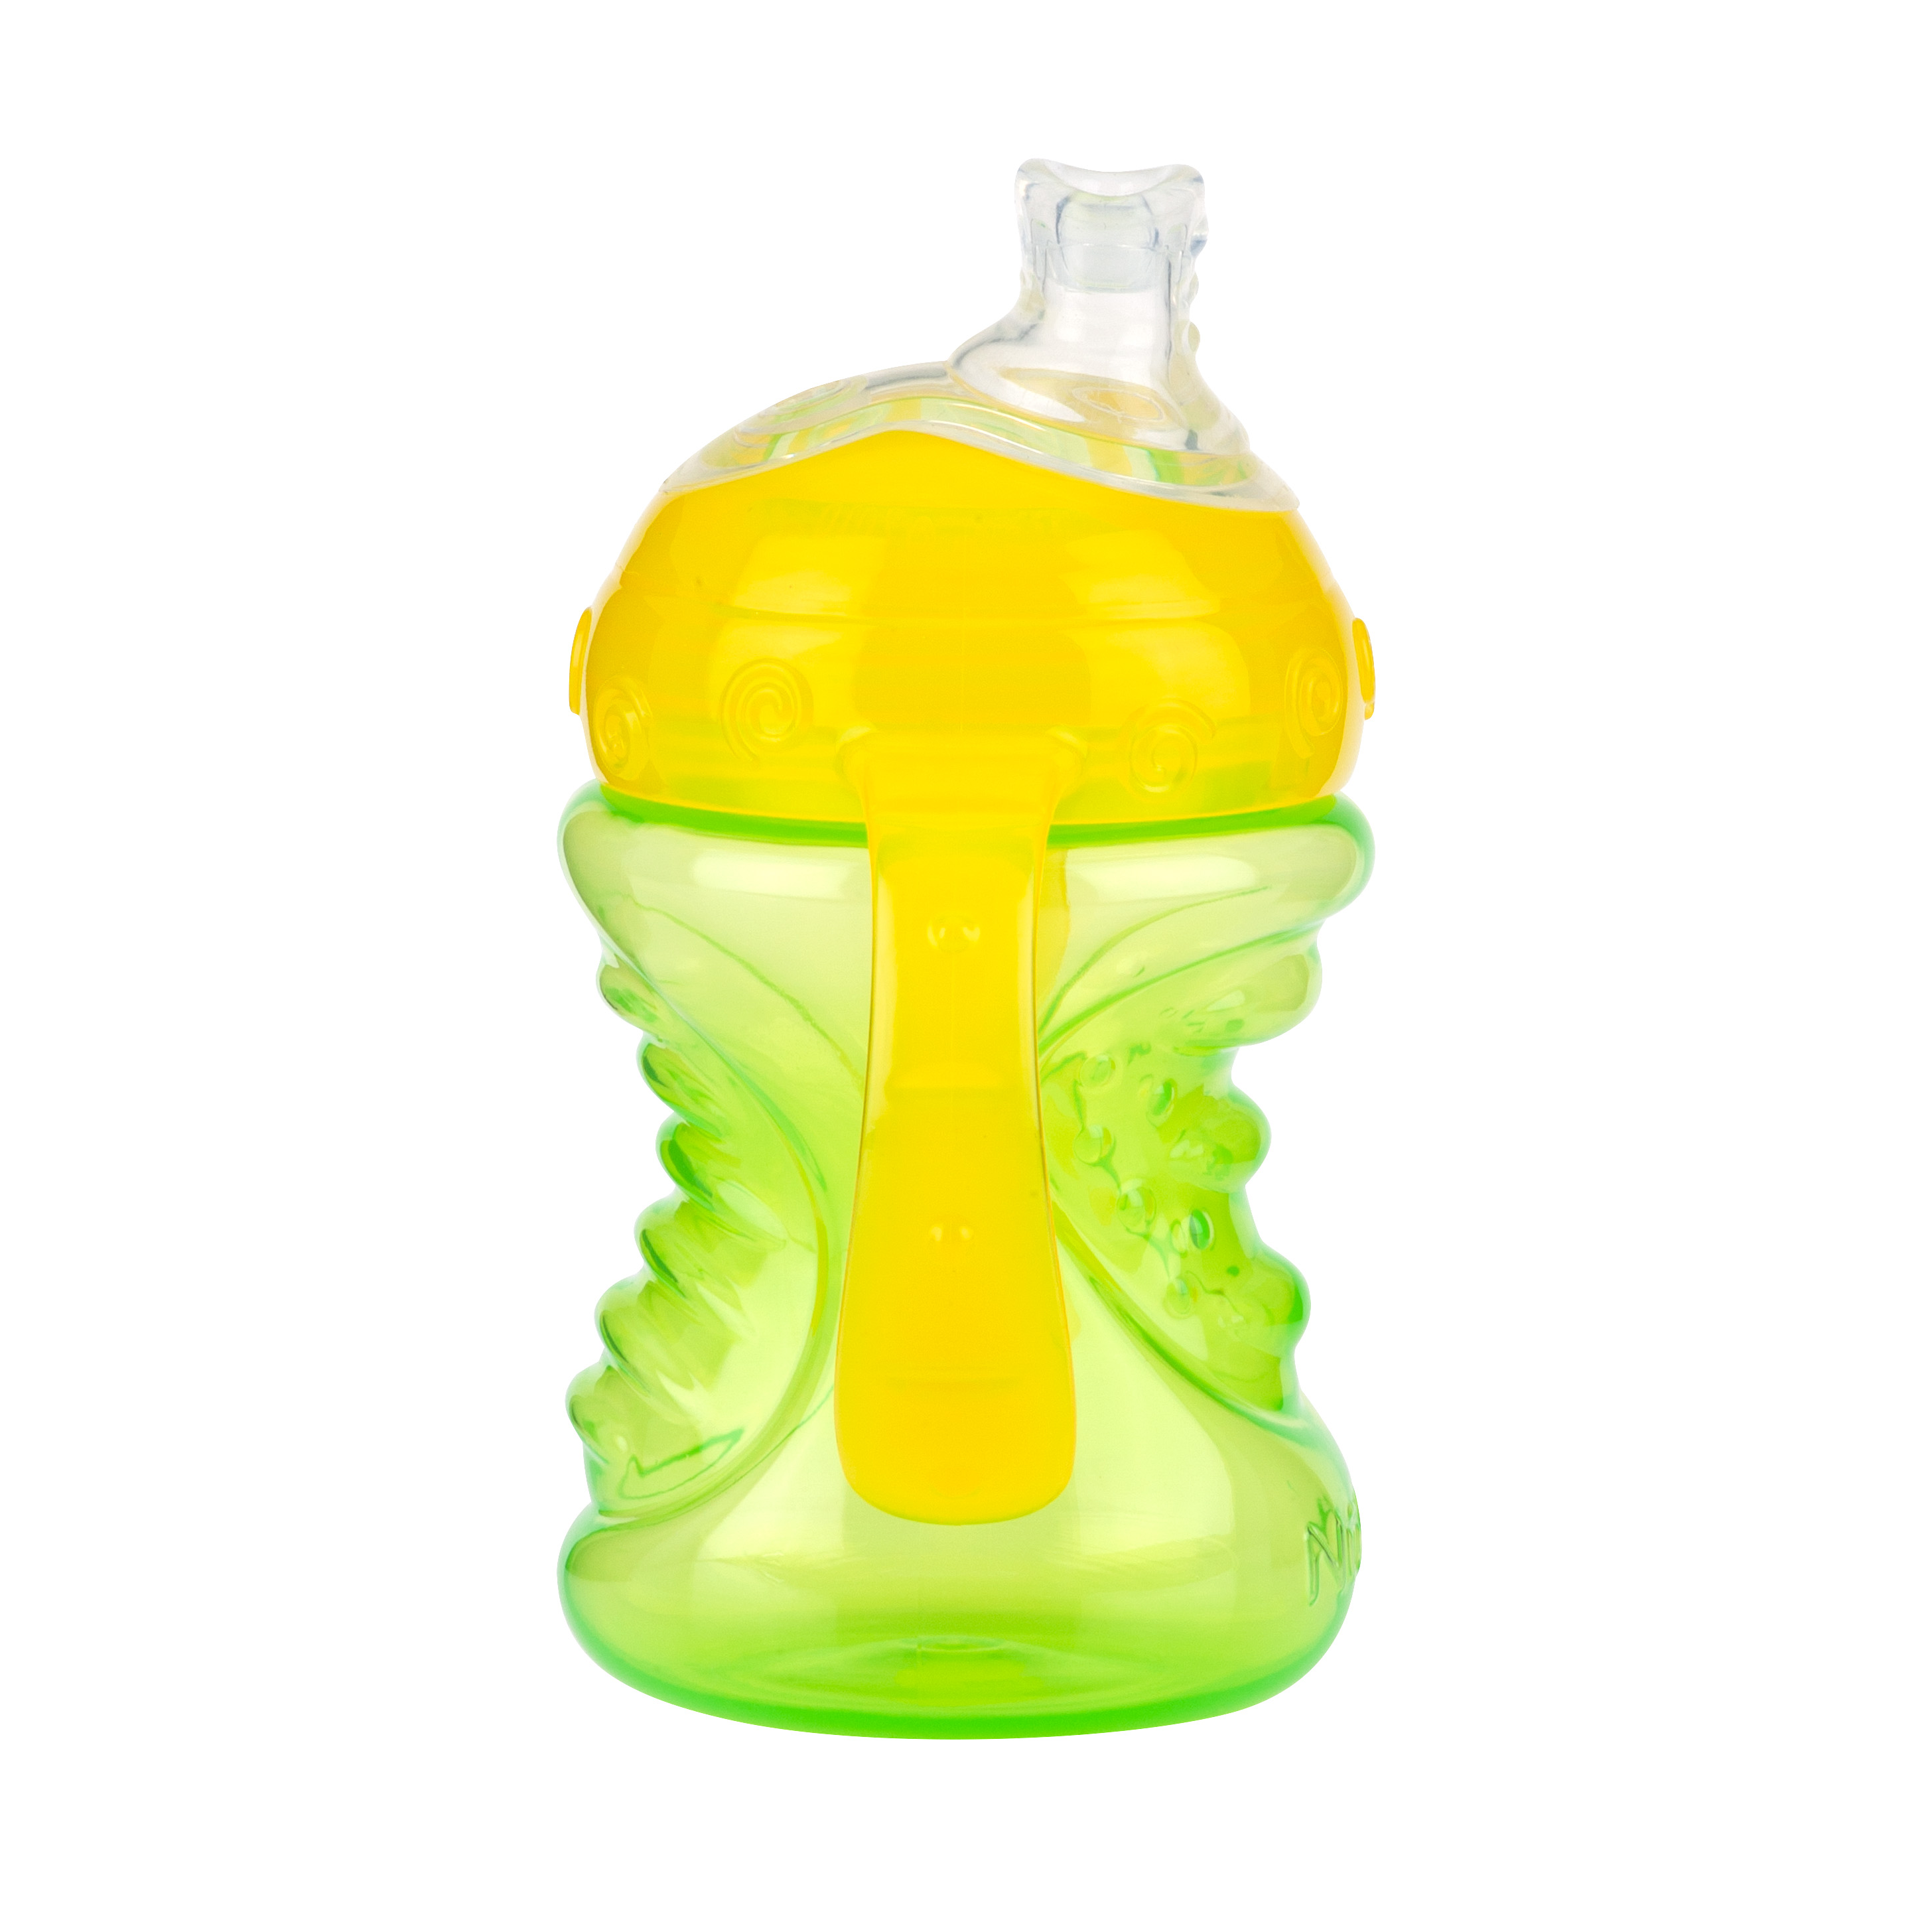 Nuby No-Spill Grip N' Sip Trainer Soft Spout Sippy Cup, 8 fl oz, 3 Count - image 4 of 9